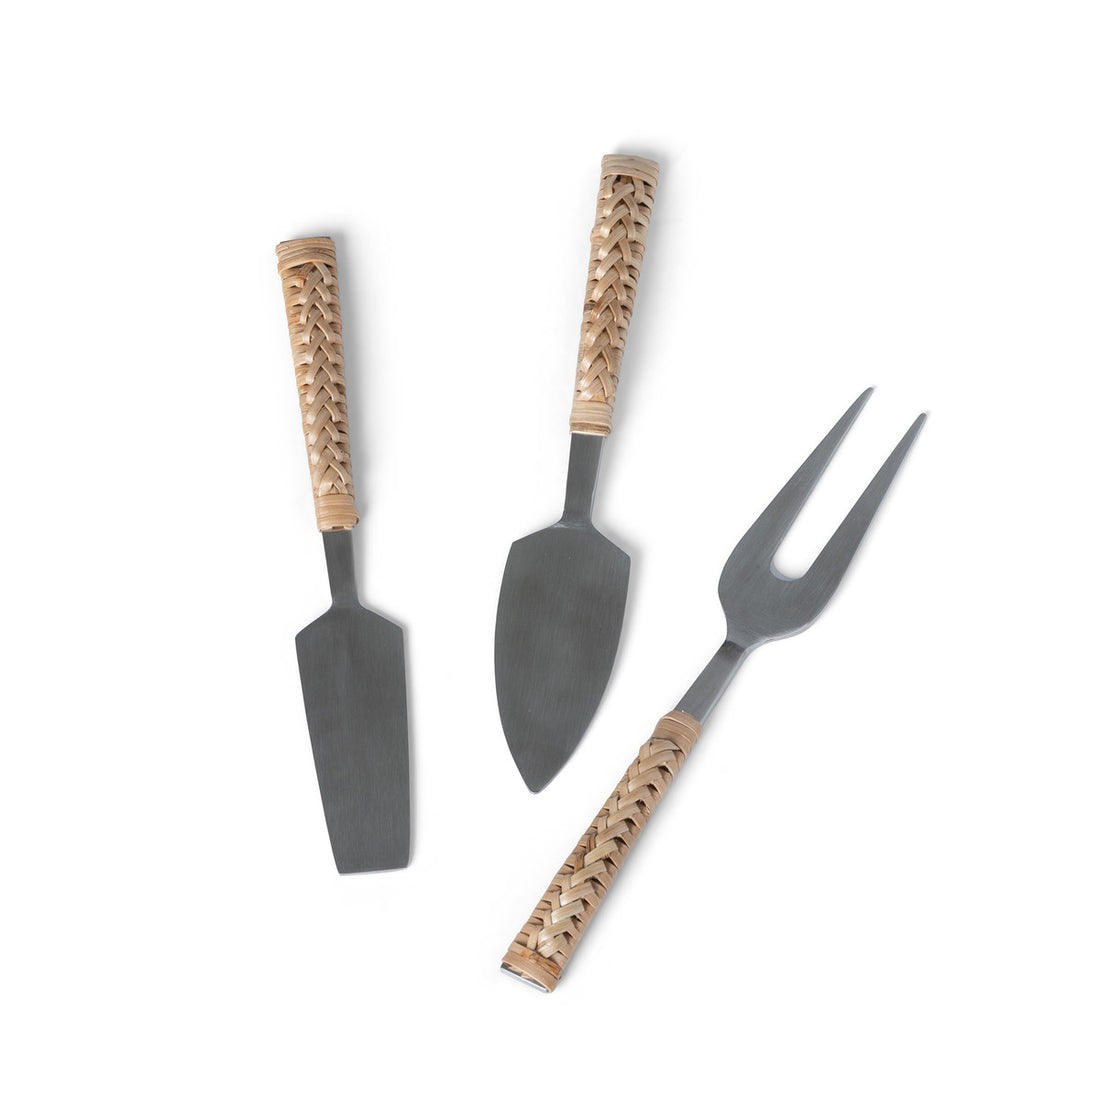 A group of Park Hill stainless steel utensils with woven bamboo handles.